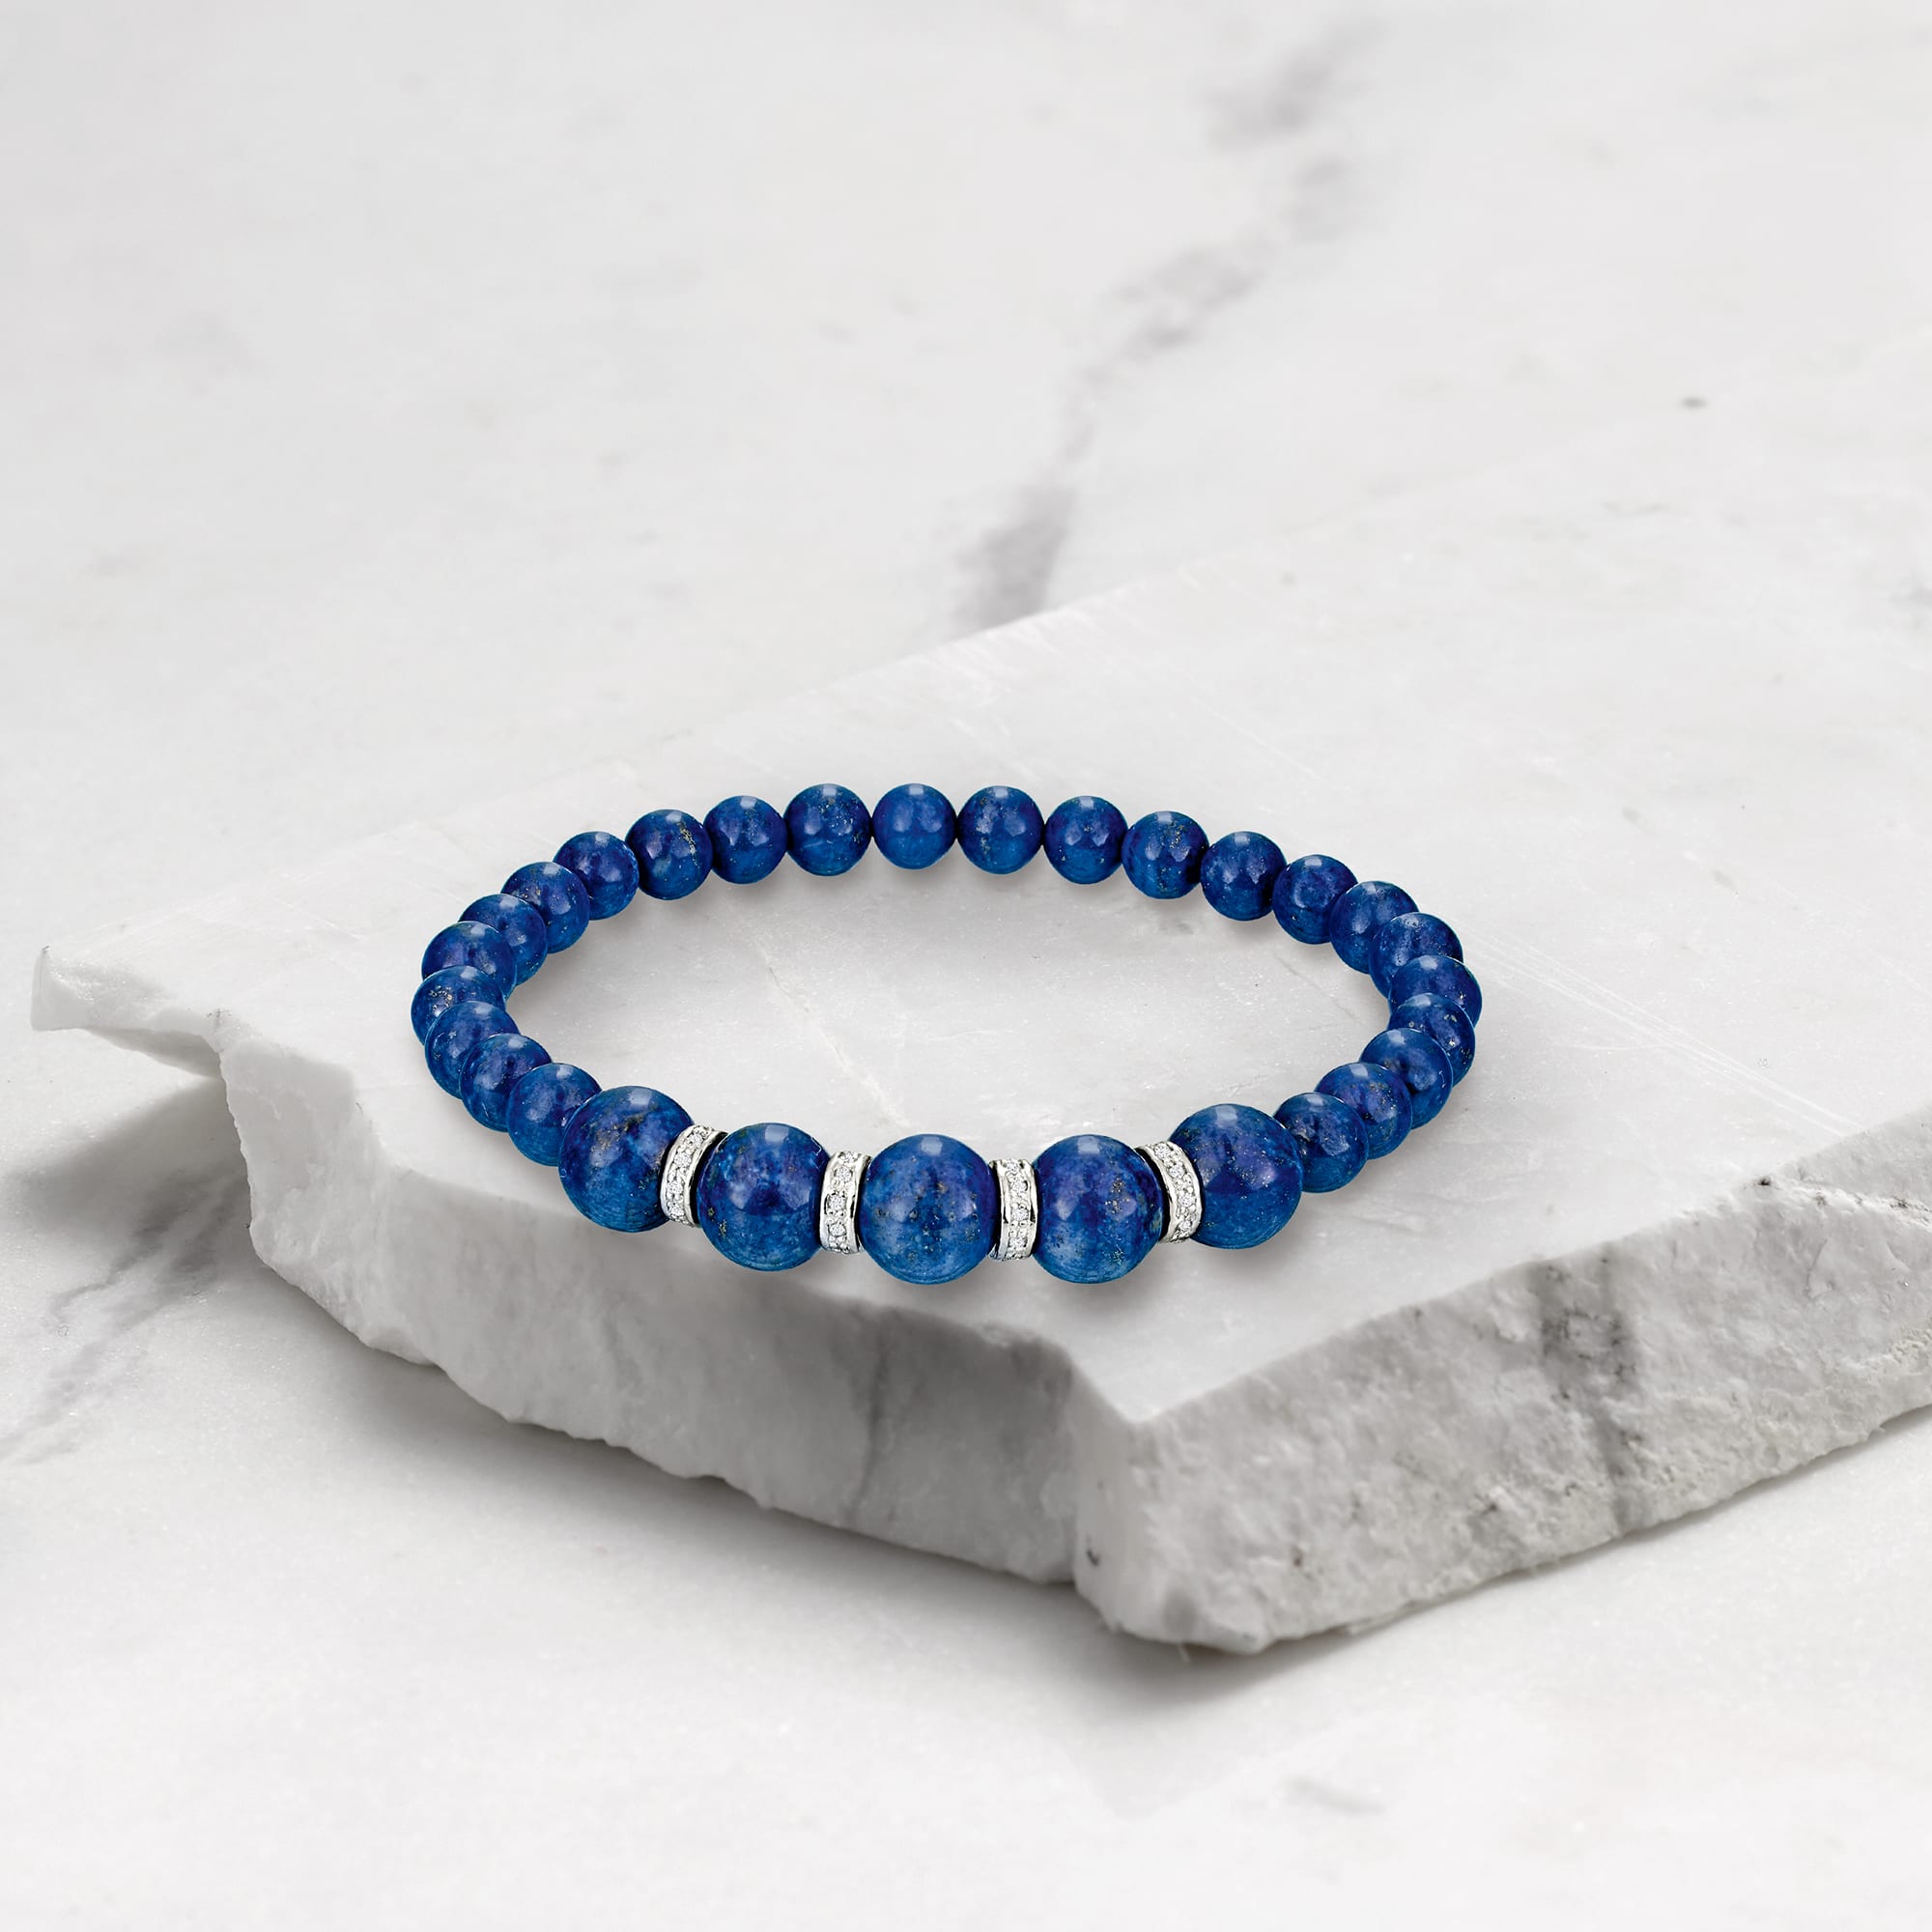 | and with .24 Bead Ross-Simons Bracelet t.w. Silver Diamond ct. Sterling Stretch 6-8mm Lapis